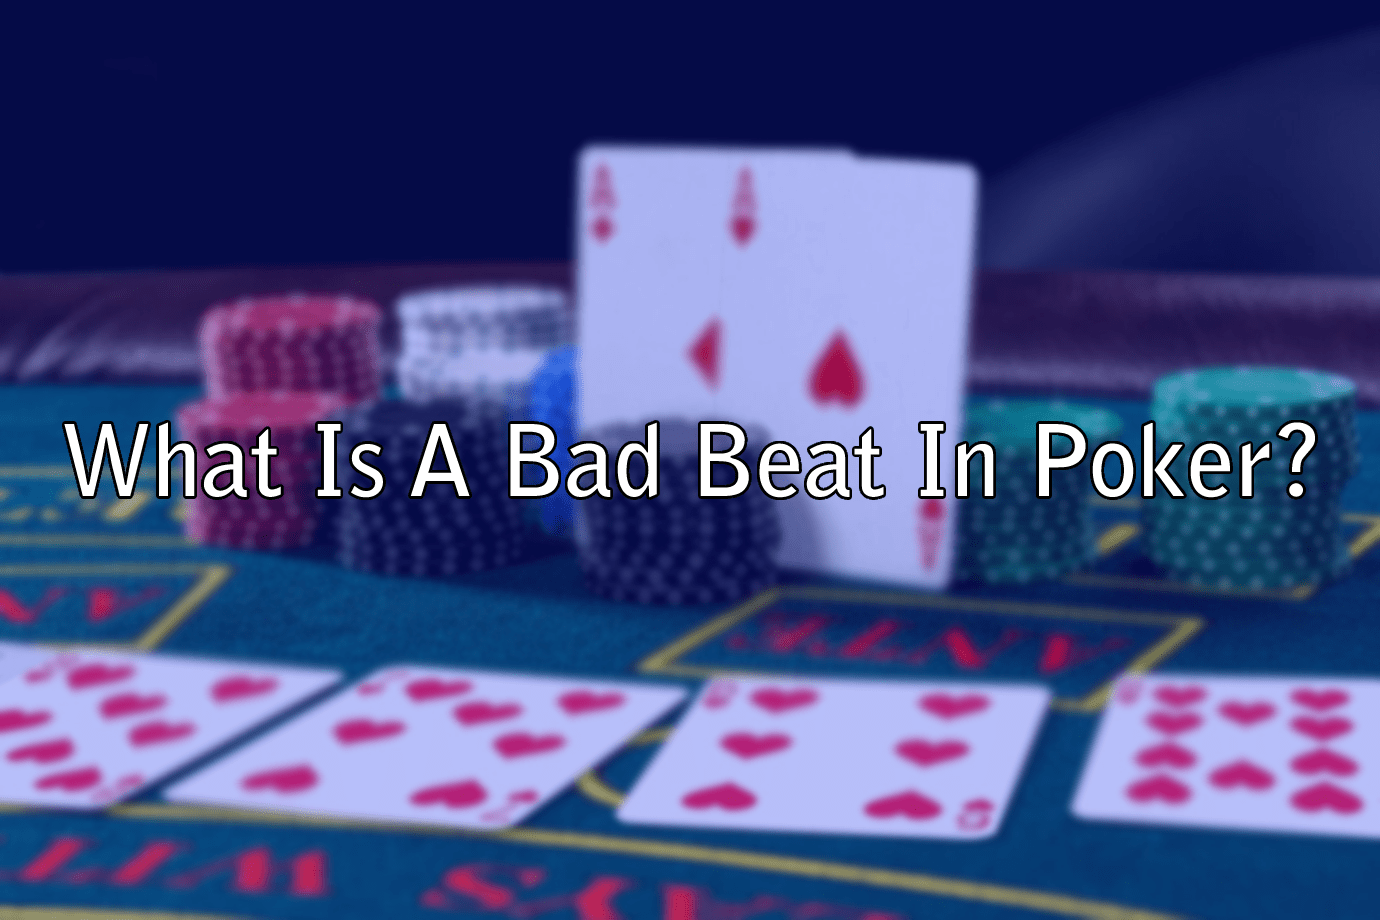 What Is A Bad Beat In Poker?